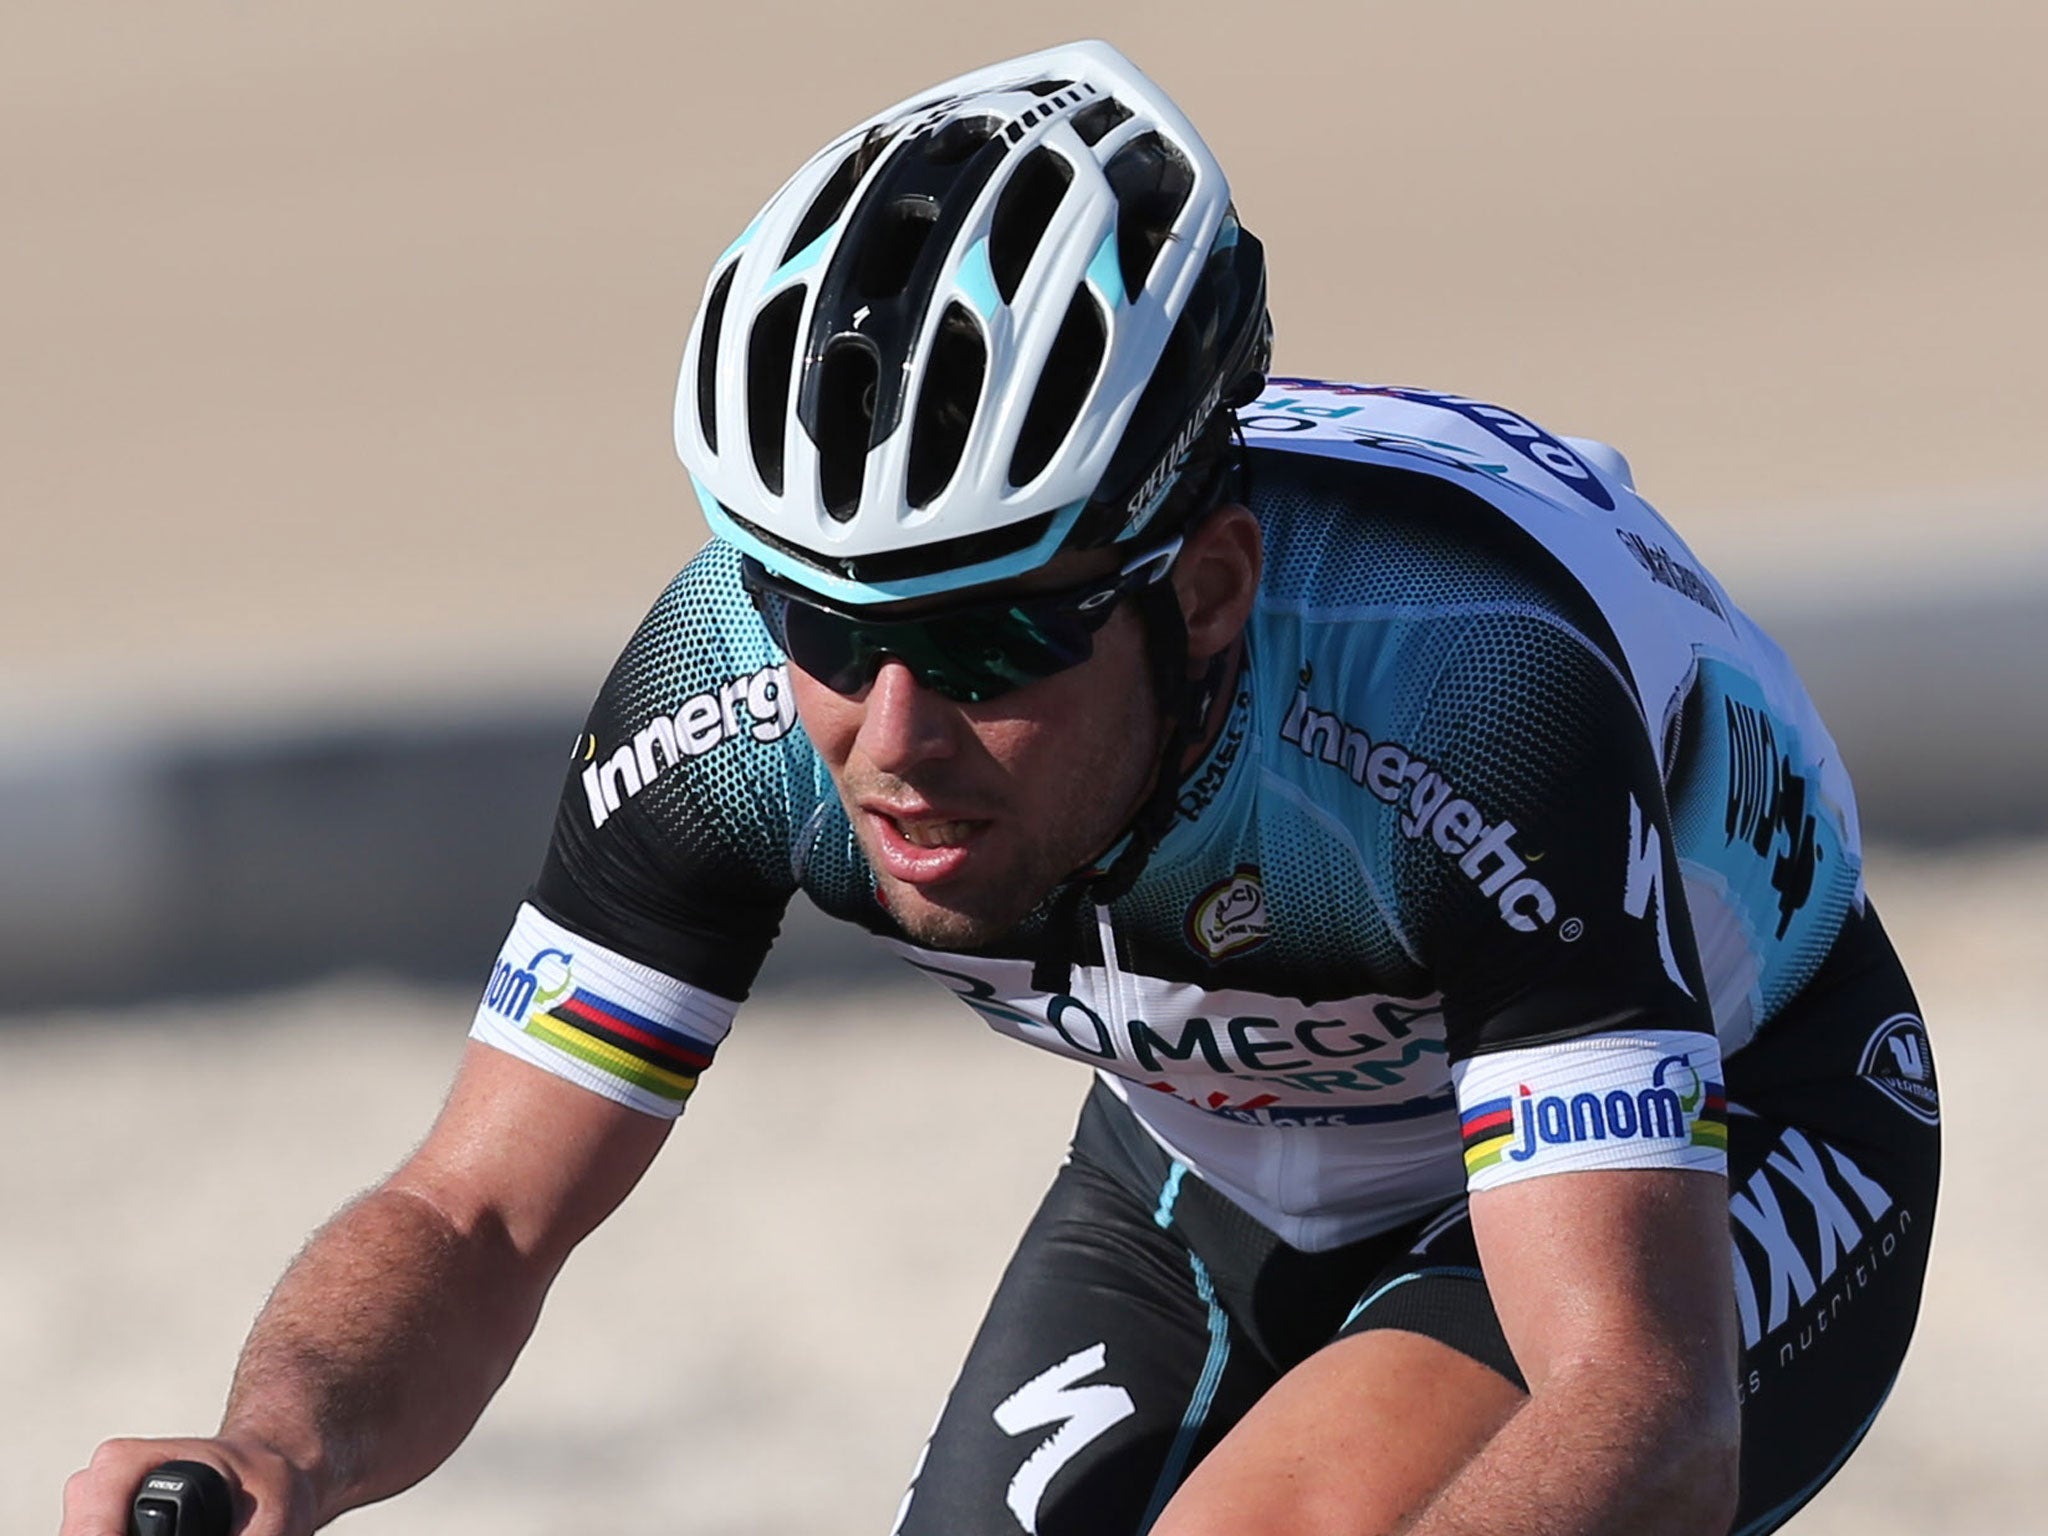 Mark Cavendish hopes to win the opening stage tomorrow